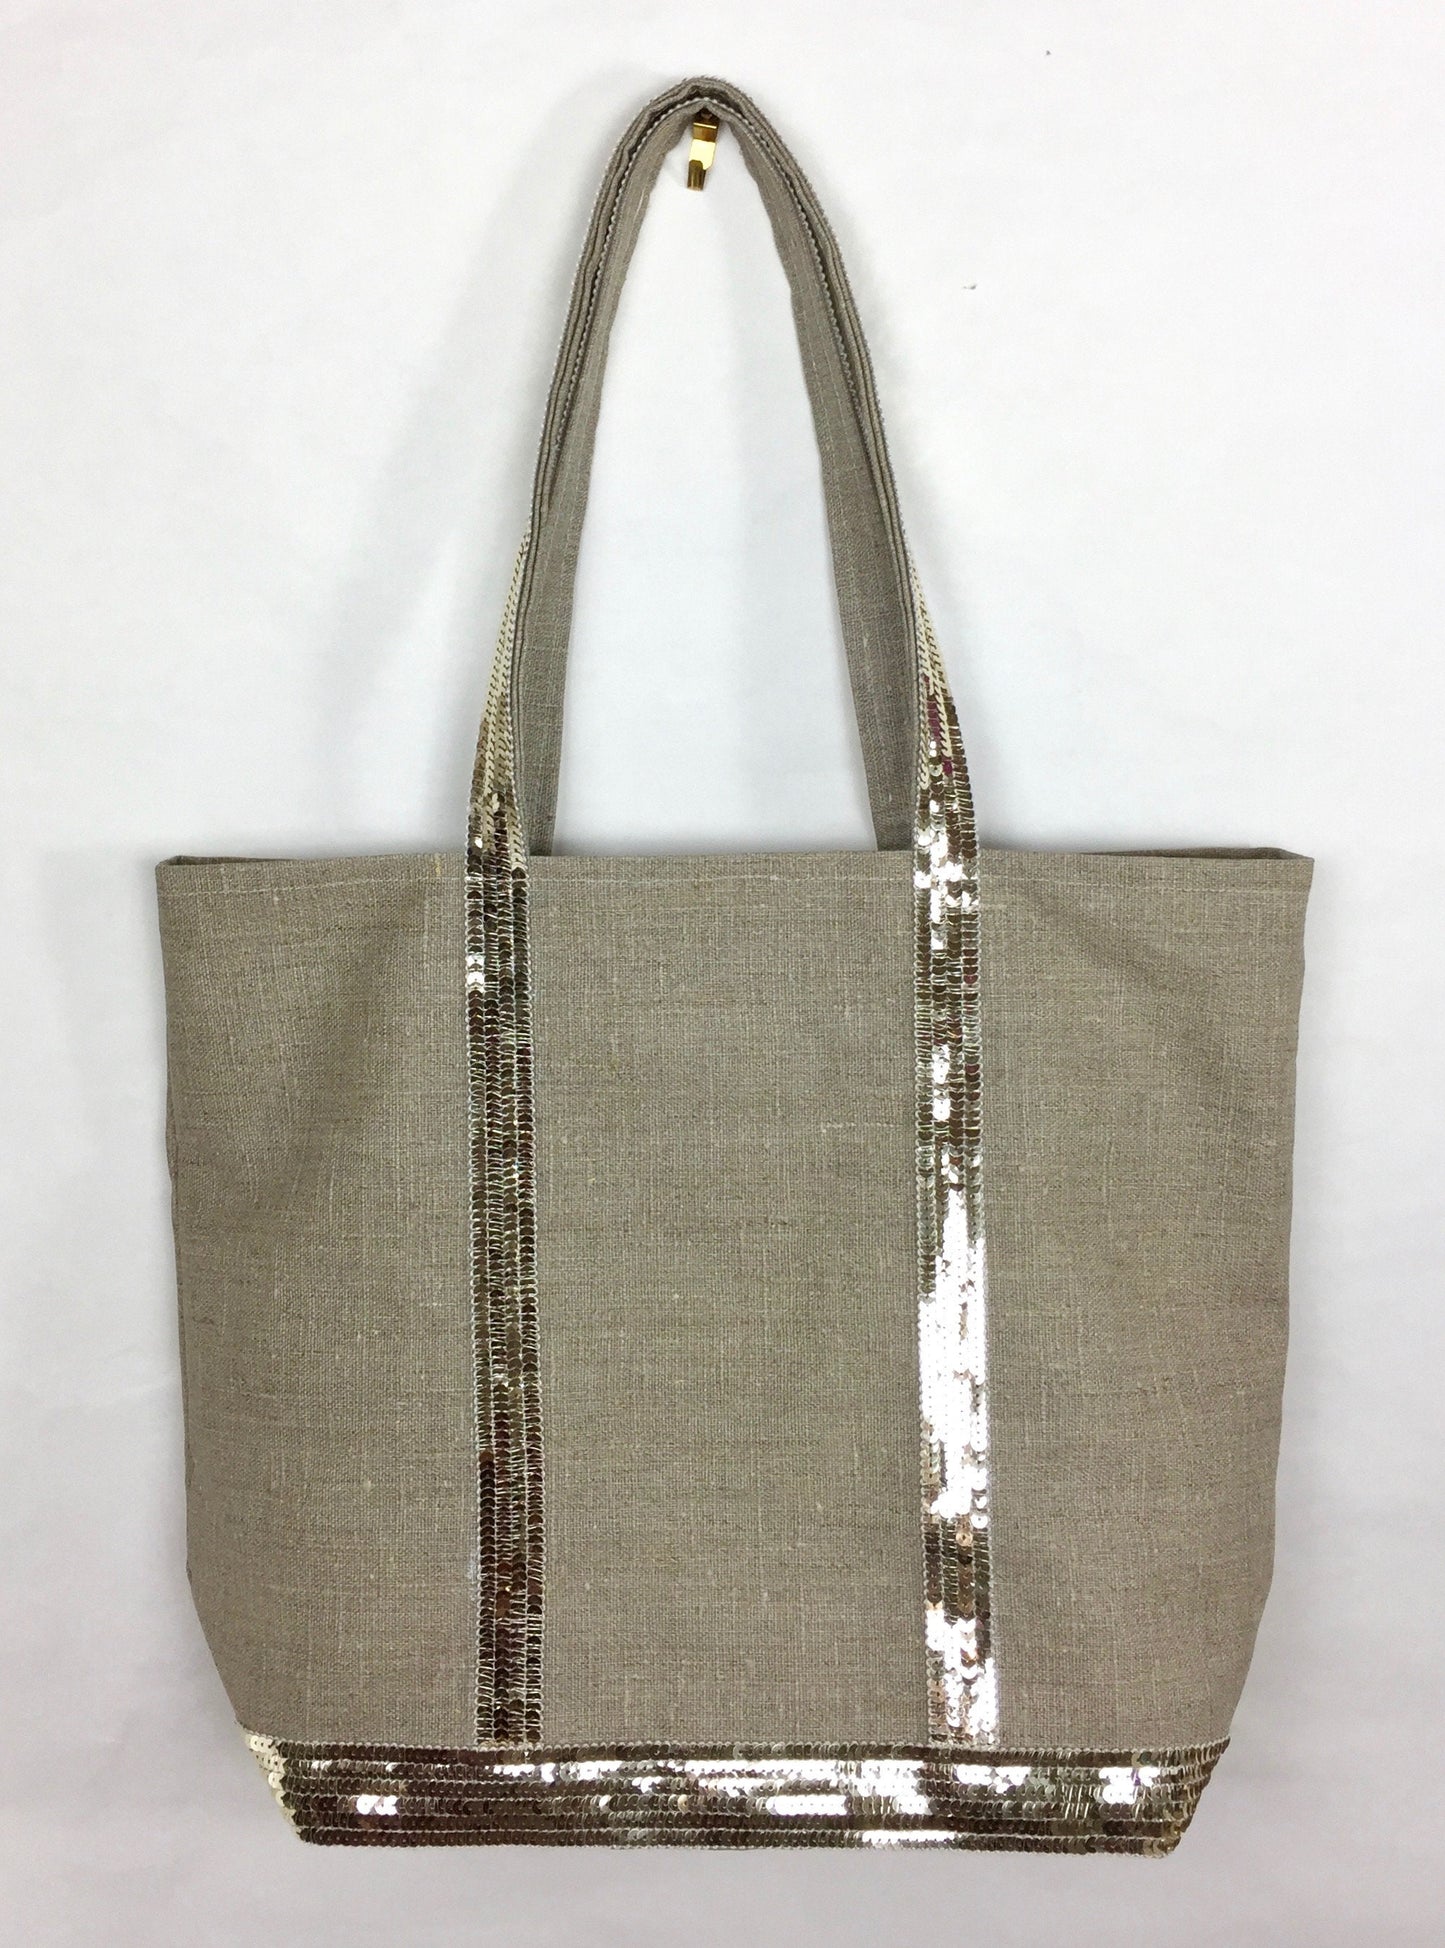 Natural coated linen shopping bag with gold glitter